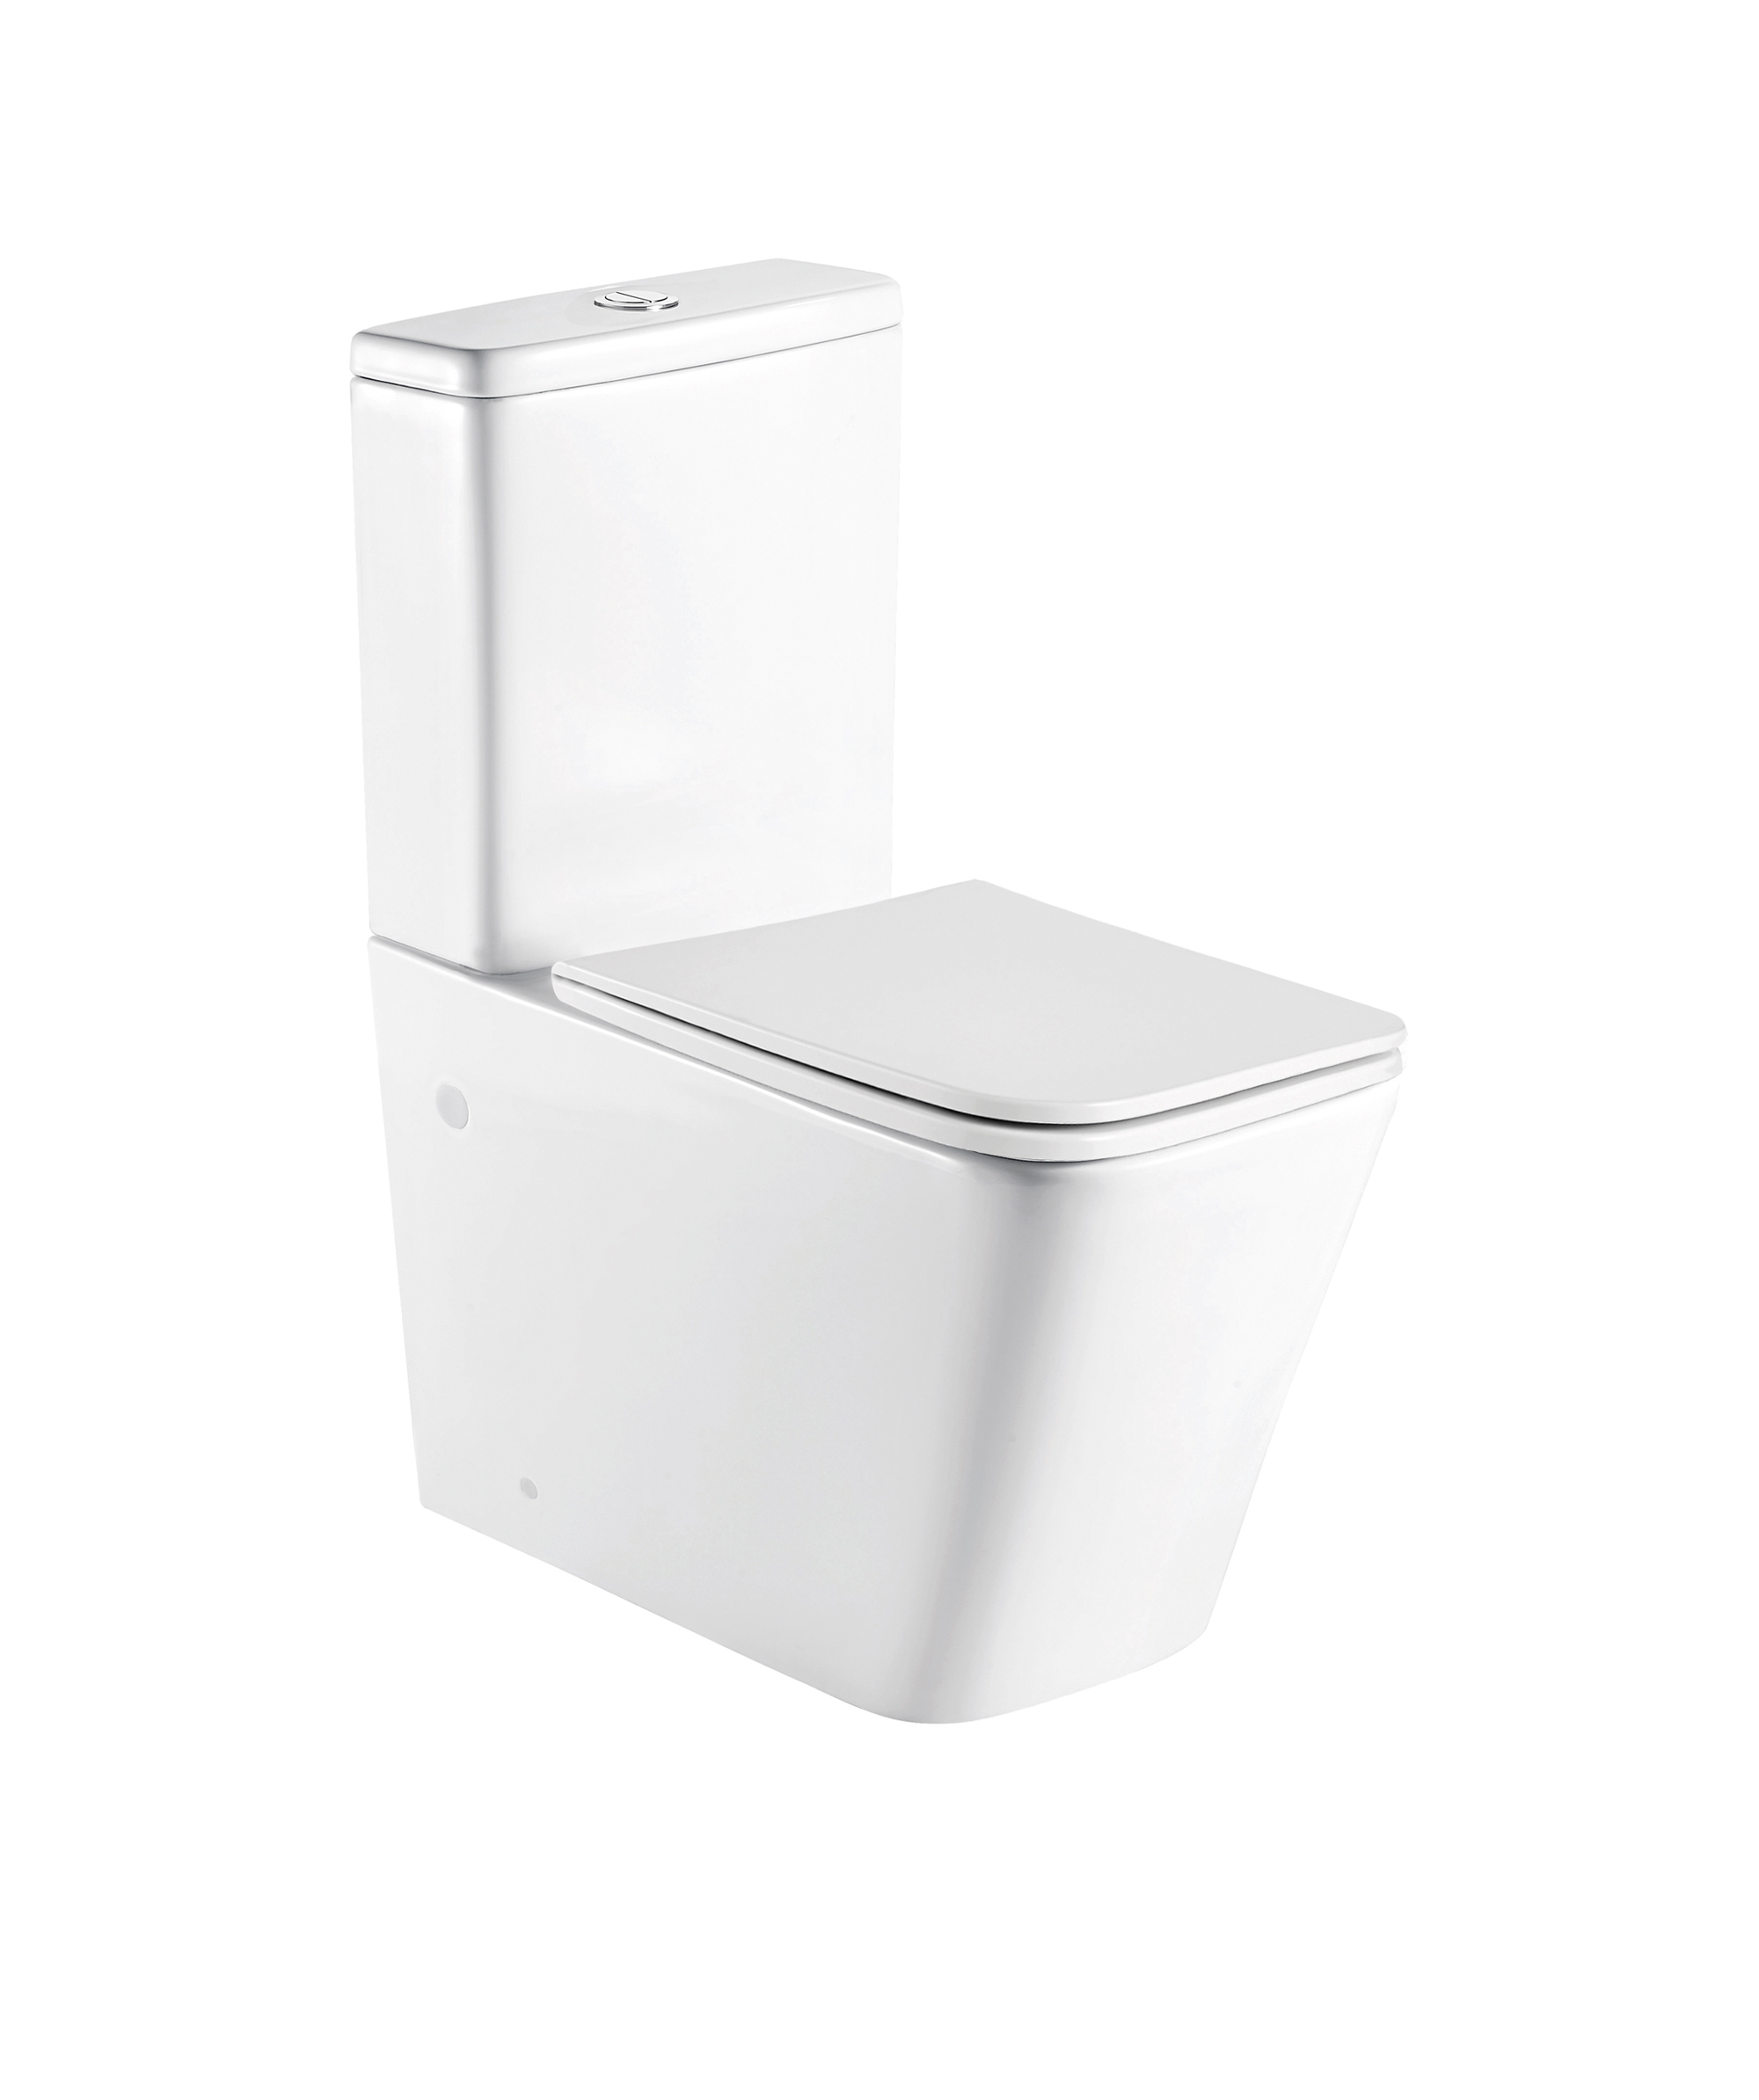 Plati Wall Faced toilet suite